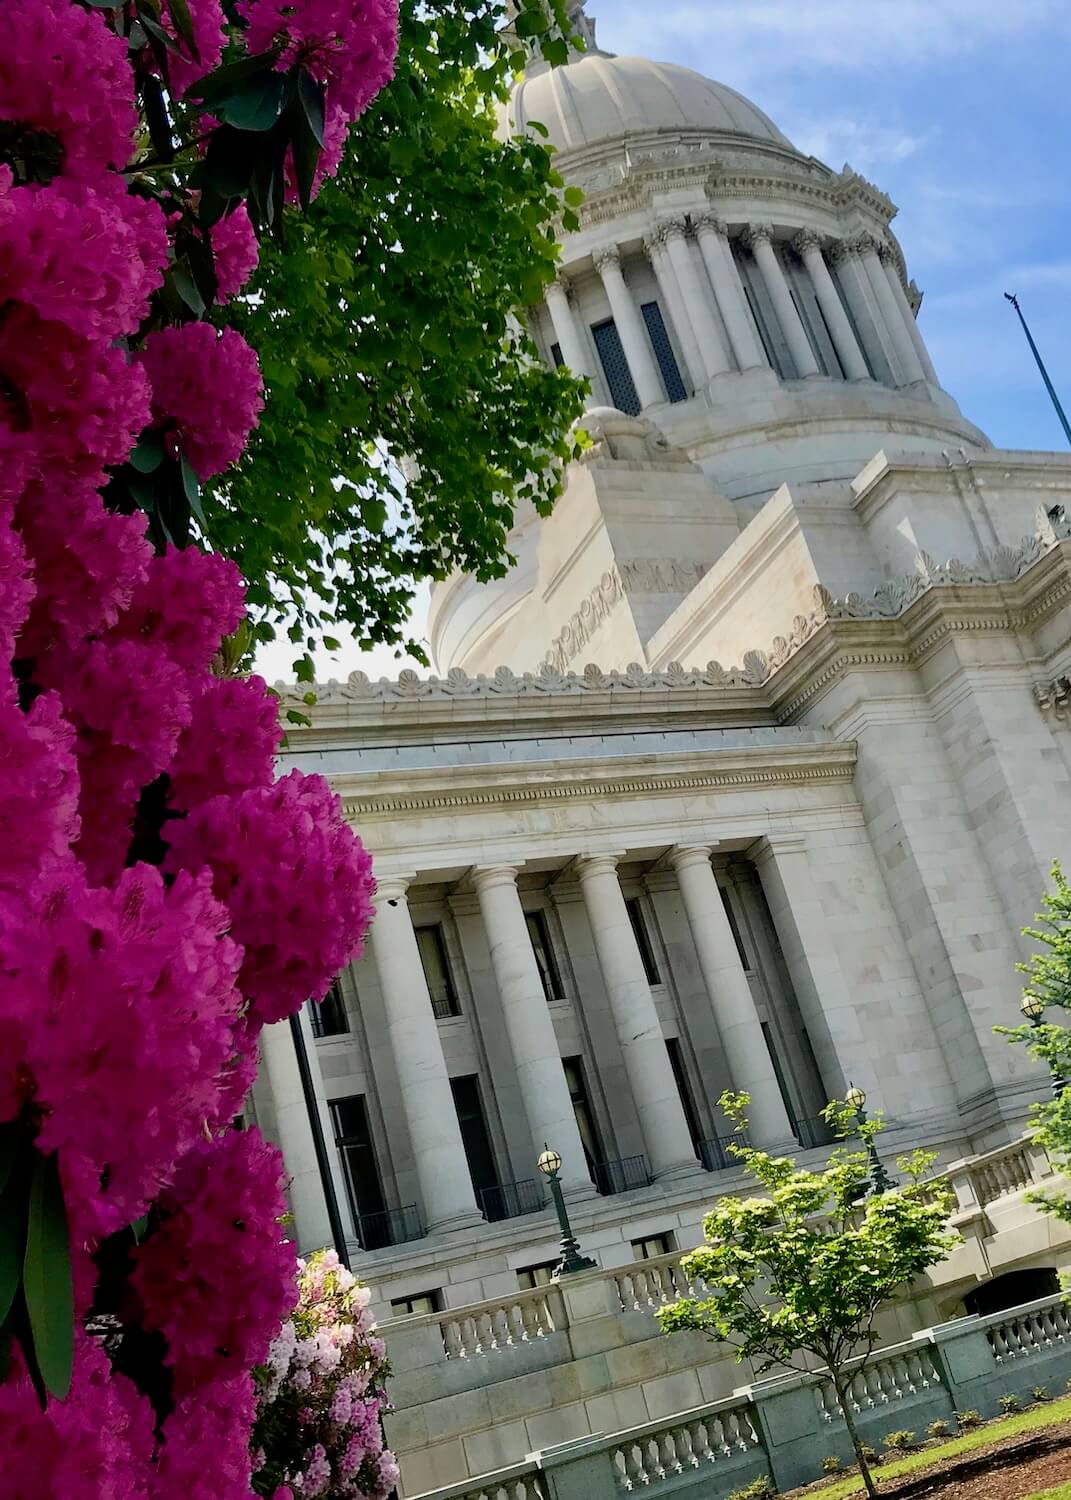 The Washington State Capitol building is commanding with large blocks of white rock fused together to create columns and done. In the foreground bright red rhododendron are at the height of blooming.